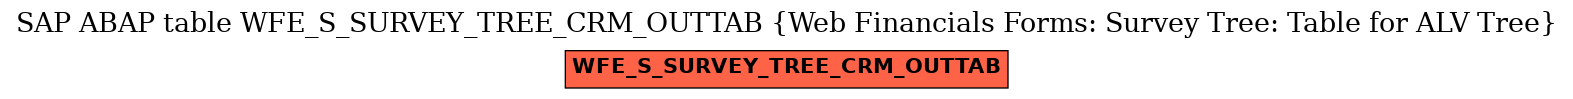 E-R Diagram for table WFE_S_SURVEY_TREE_CRM_OUTTAB (Web Financials Forms: Survey Tree: Table for ALV Tree)